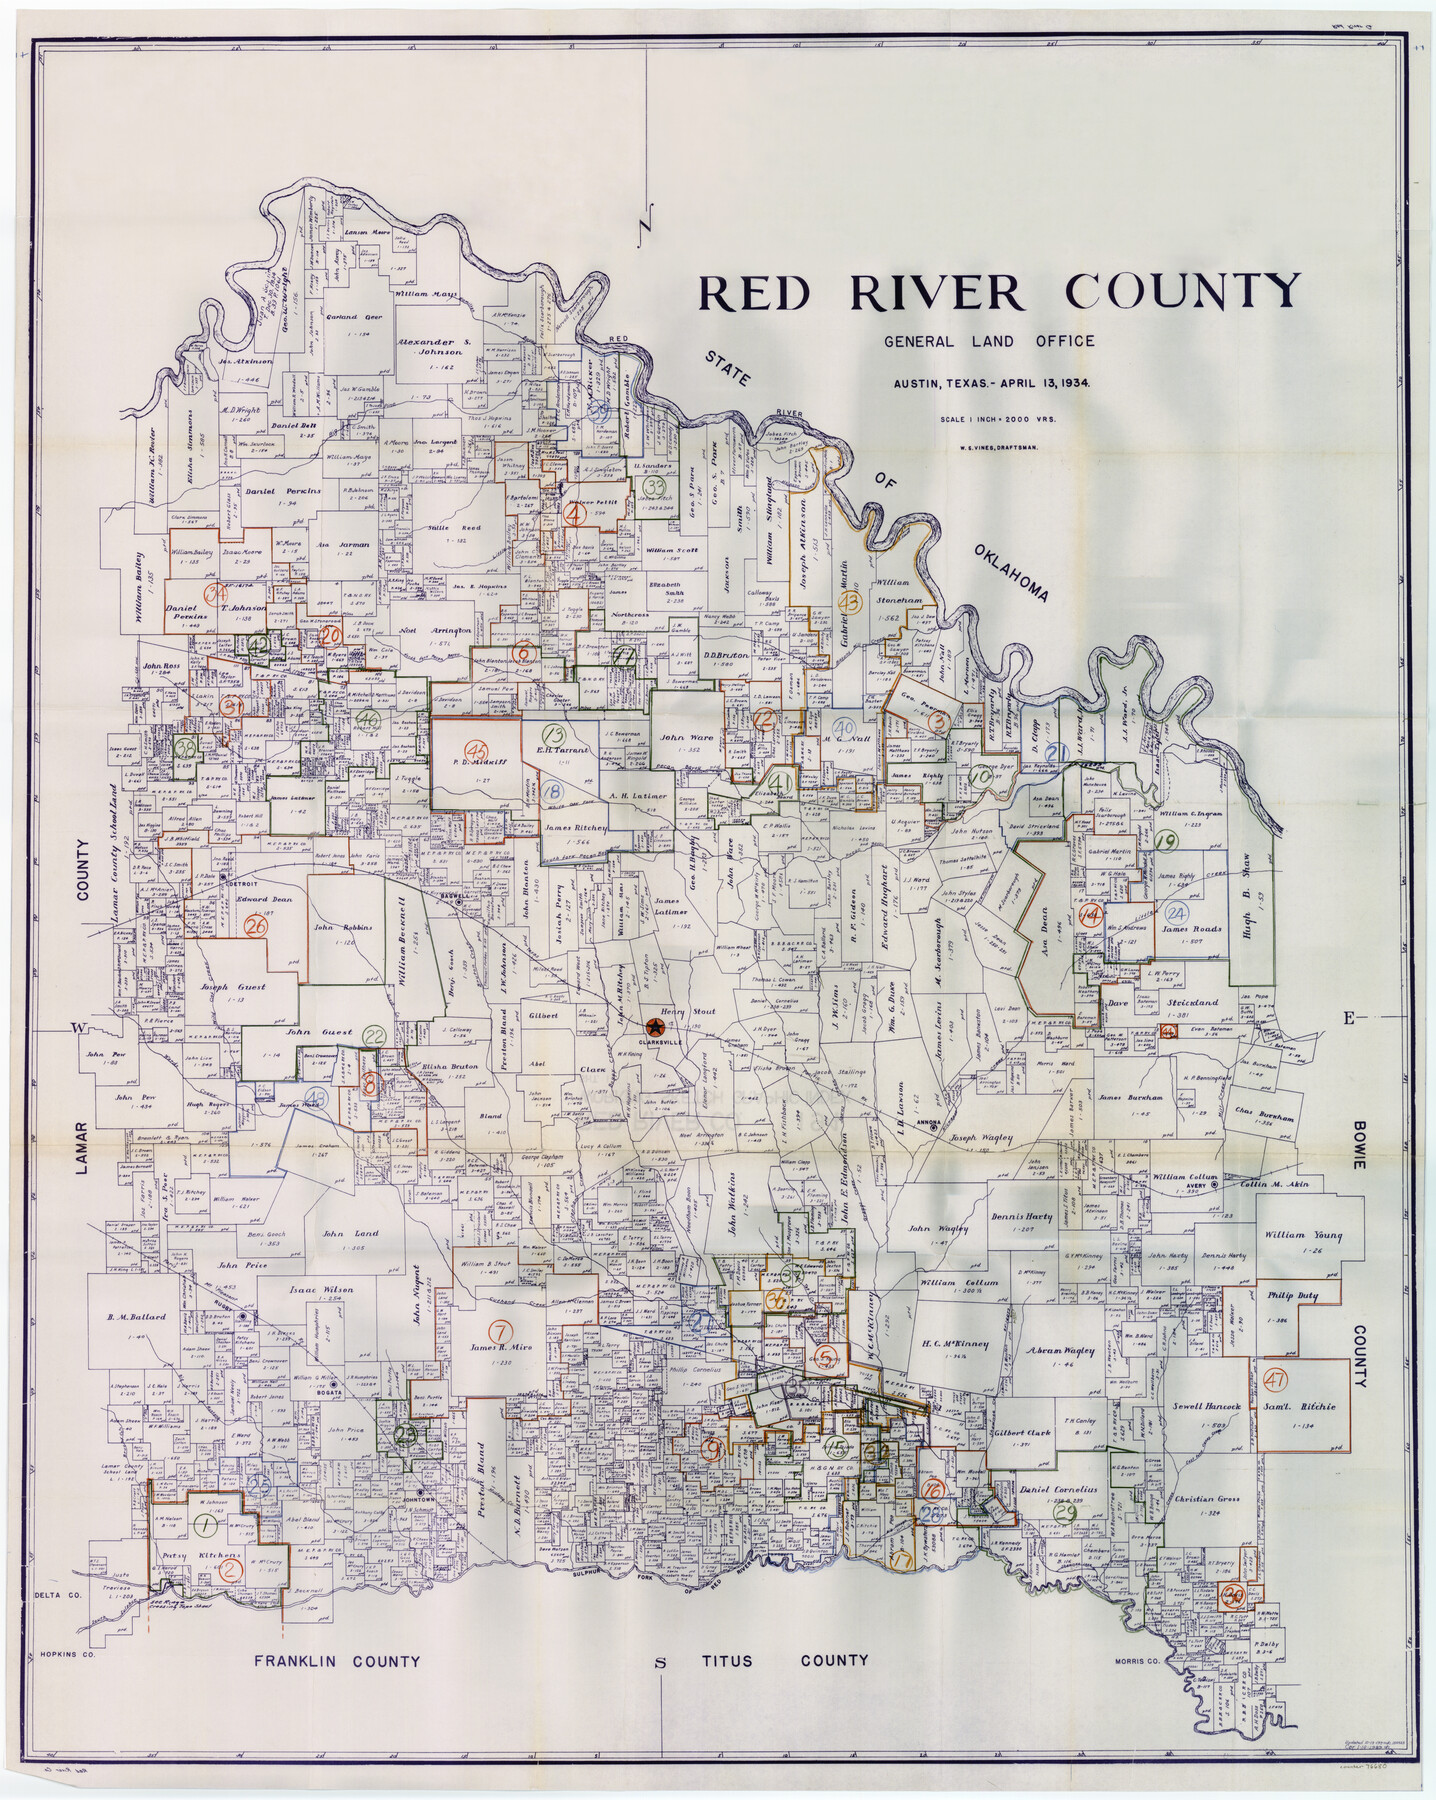 76680, Red River County Working Sketch Graphic Index, Sheet 1 (Sketches 1 to 48), General Map Collection